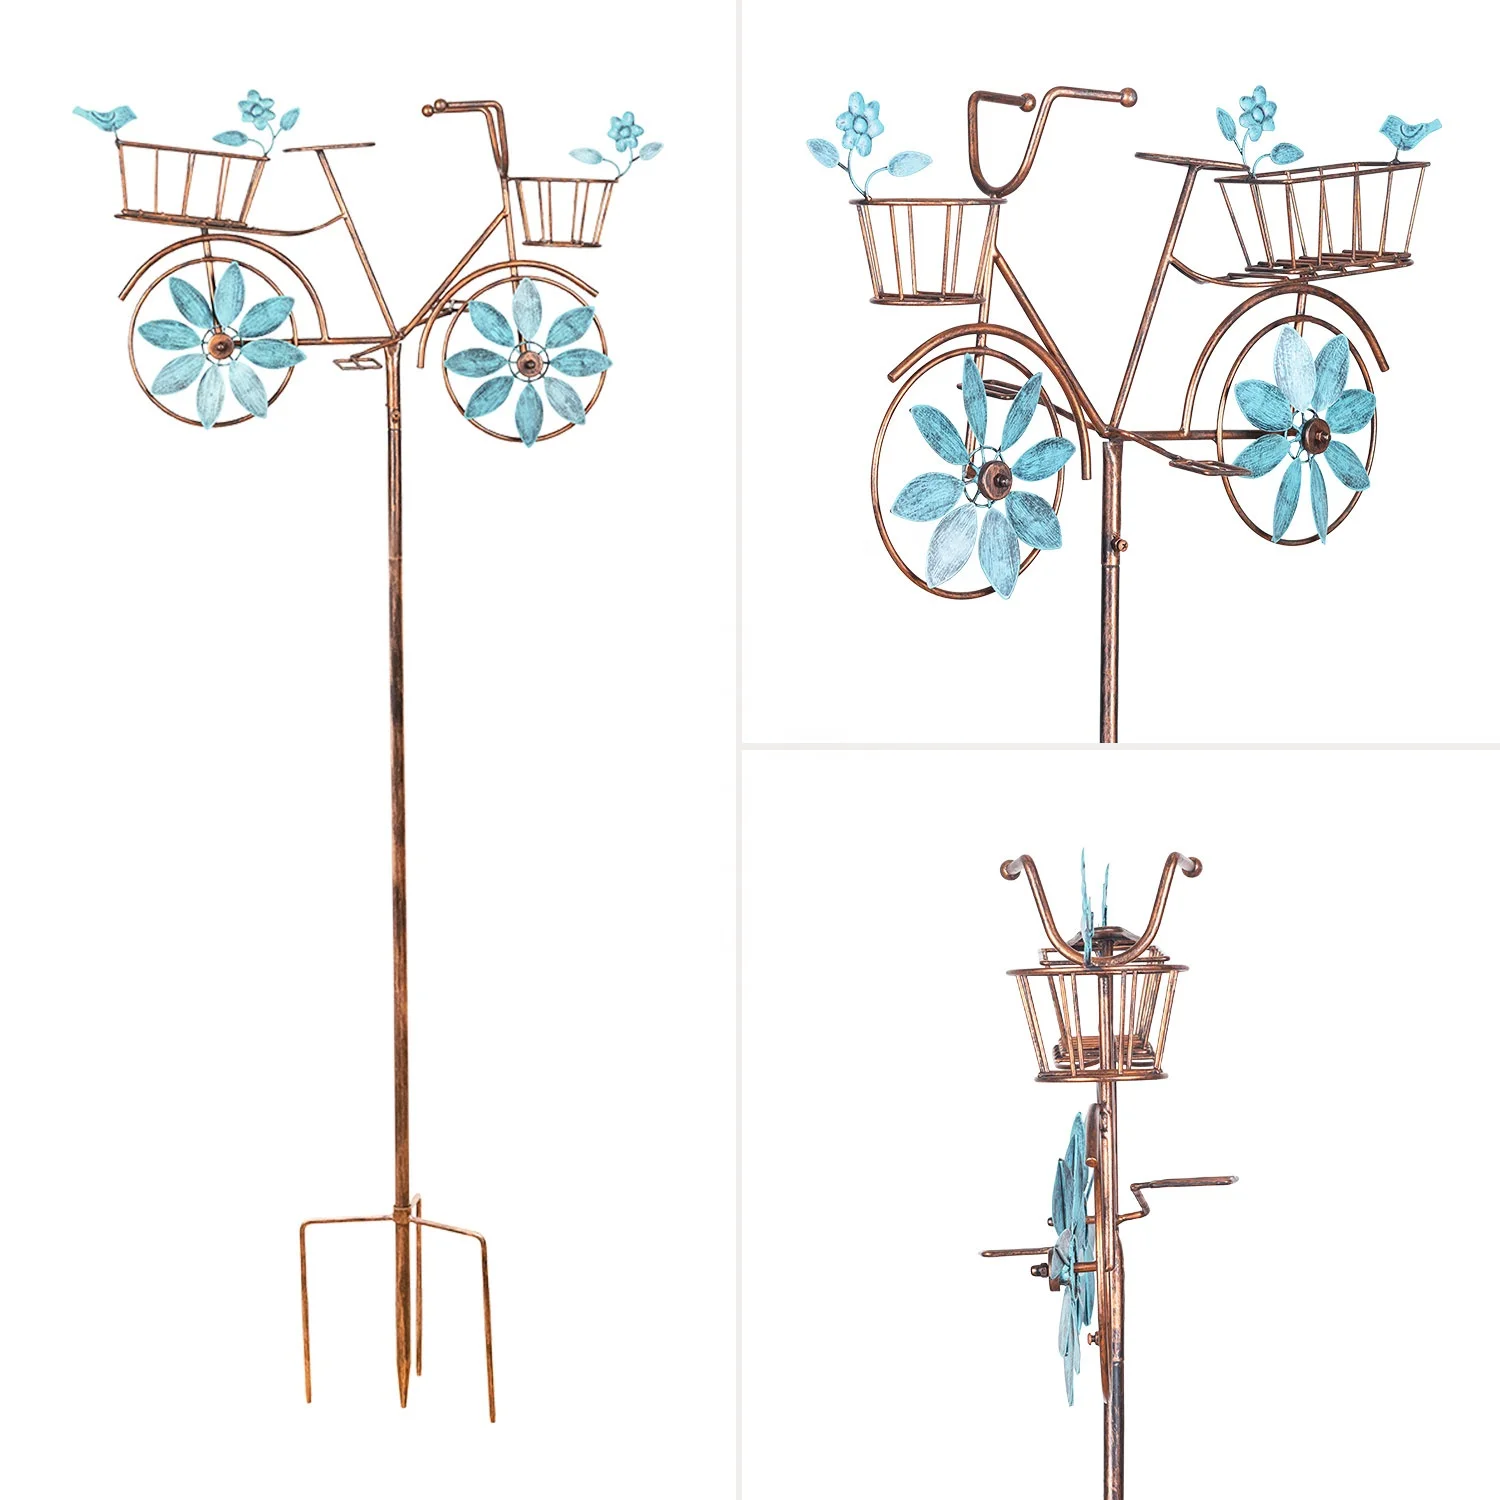 Bicycle Decor Garden Wind Spinner Lawn Stake Ornamental Windmill Outdoor Metal Bicycle Windmill